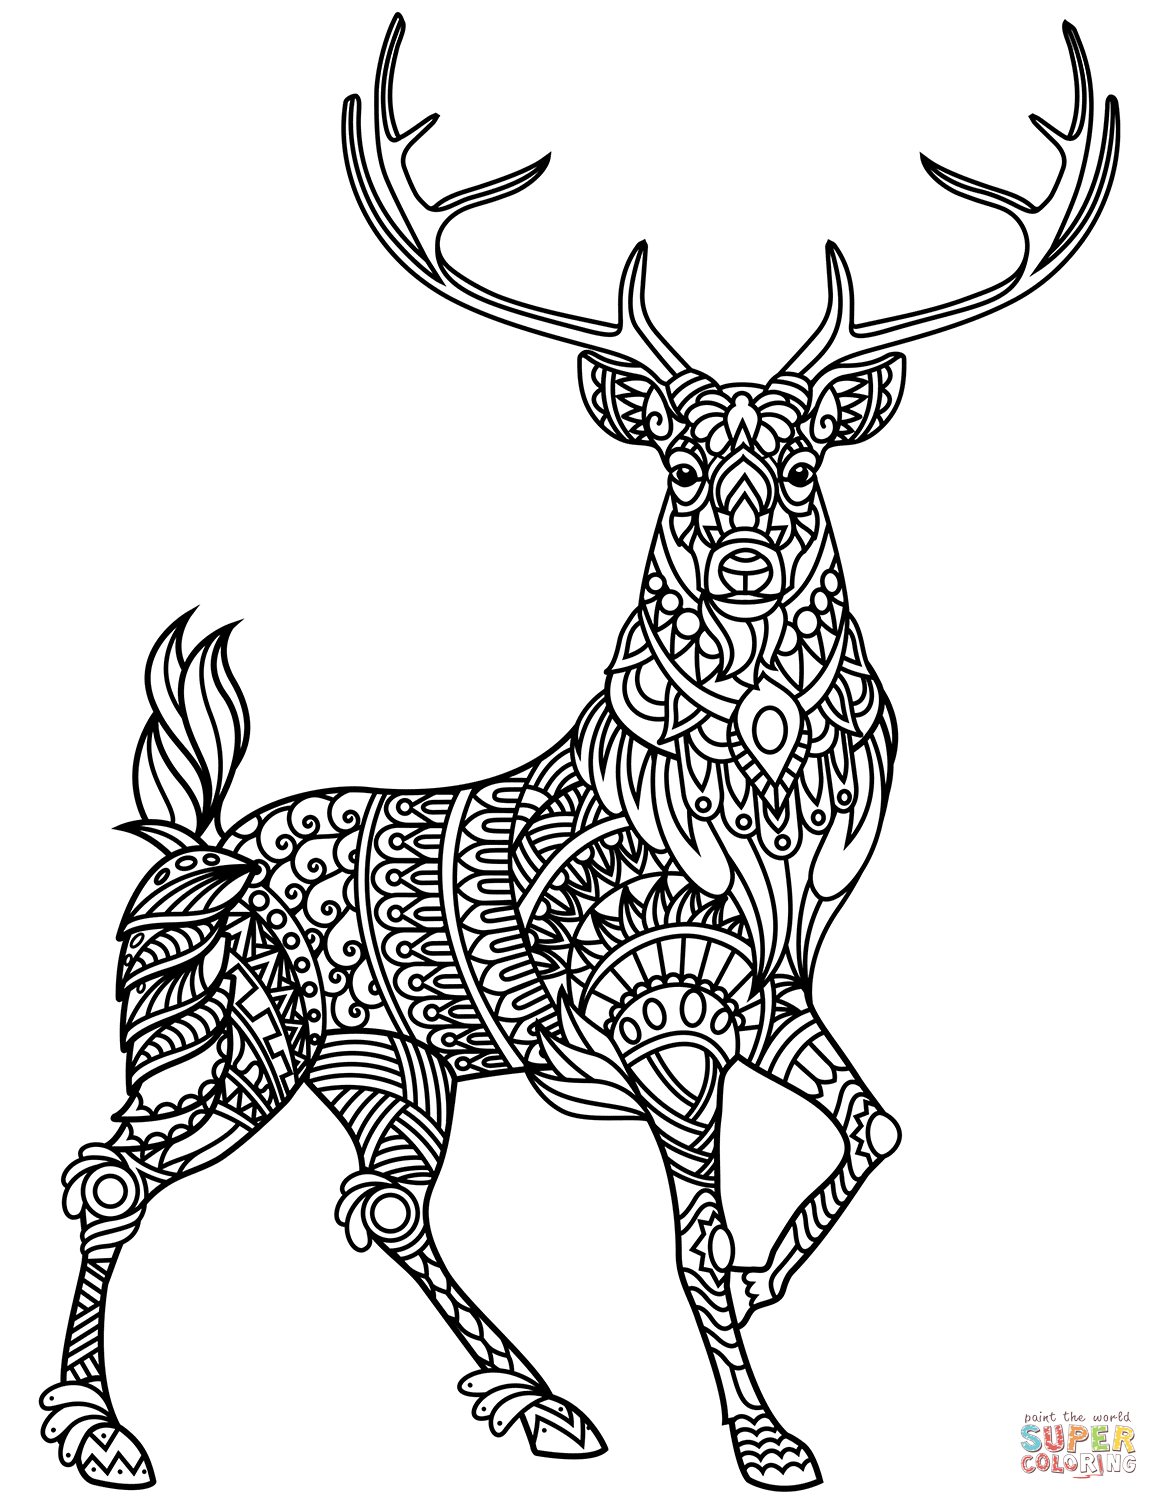 Deer zentangle coloring page free printable coloring pages